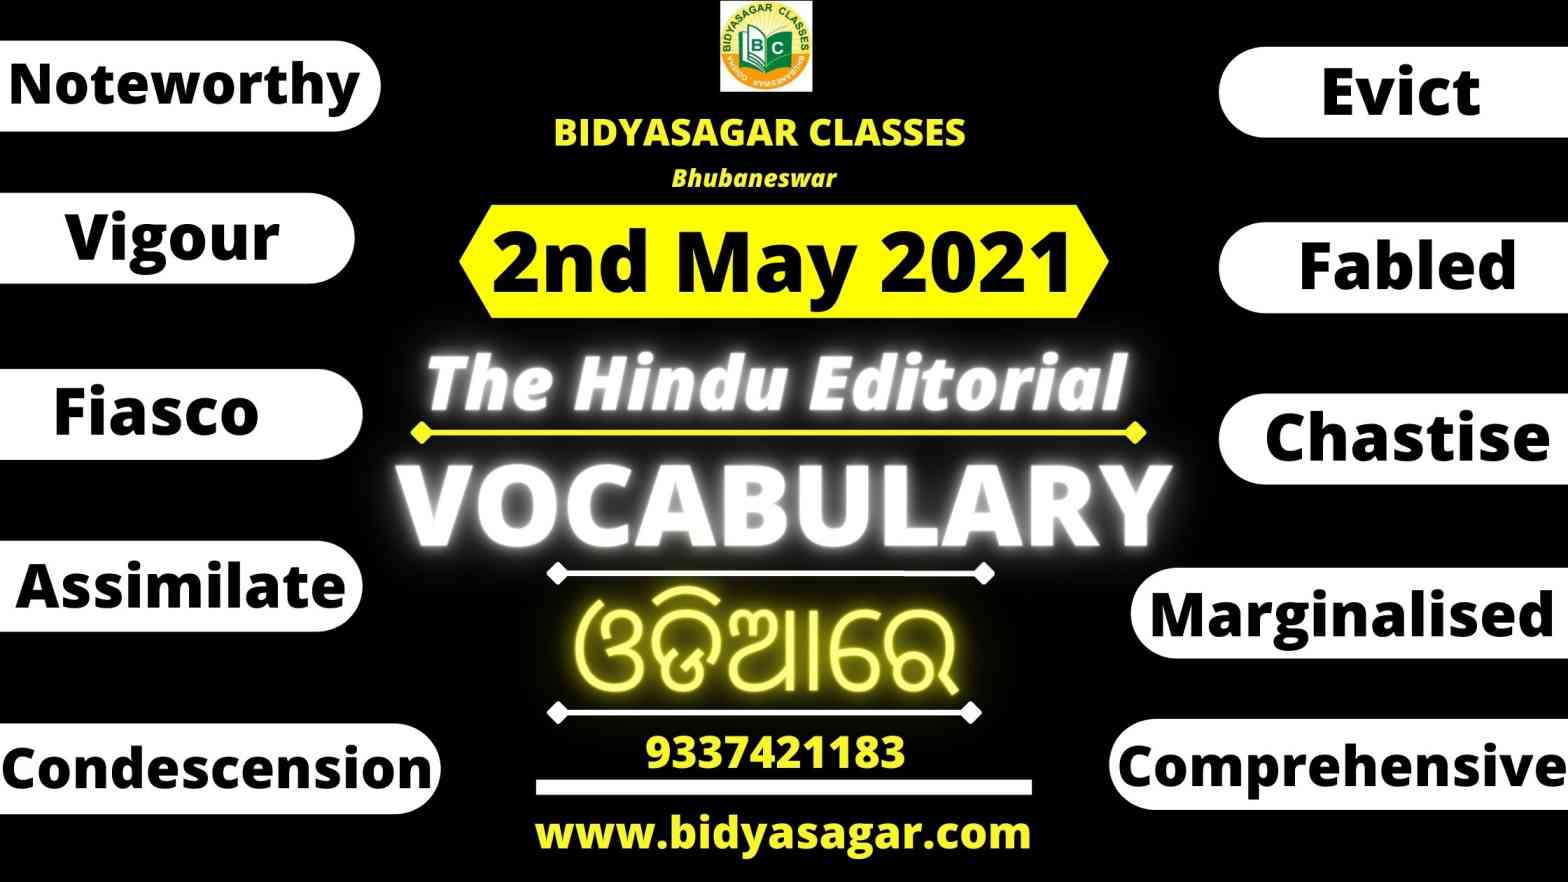 The Hindu Editorial Vocabulary of 2nd May 2021